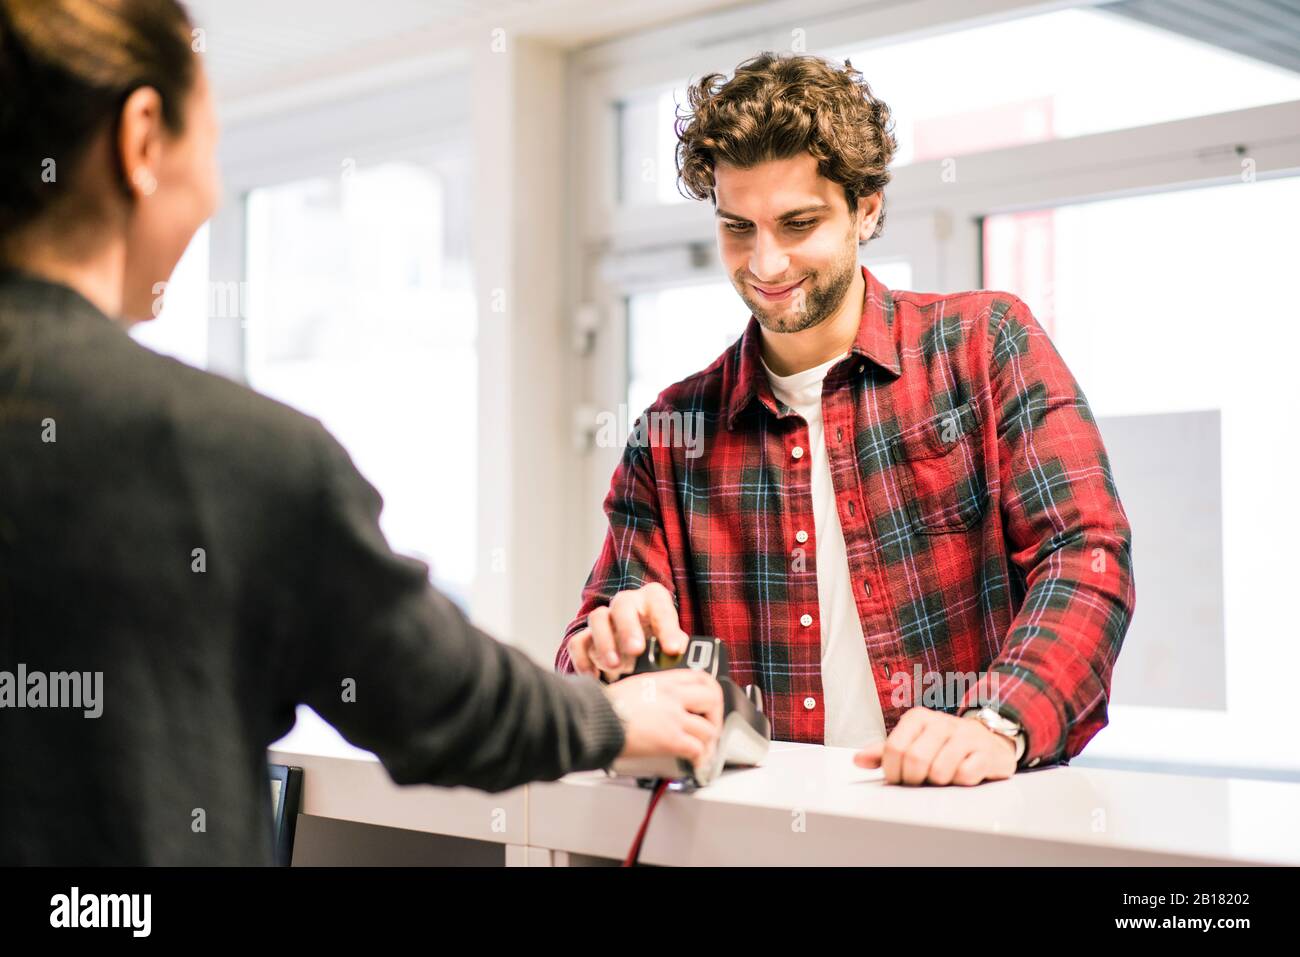 Man paying with credit card at the counter of a shop Stock Photo